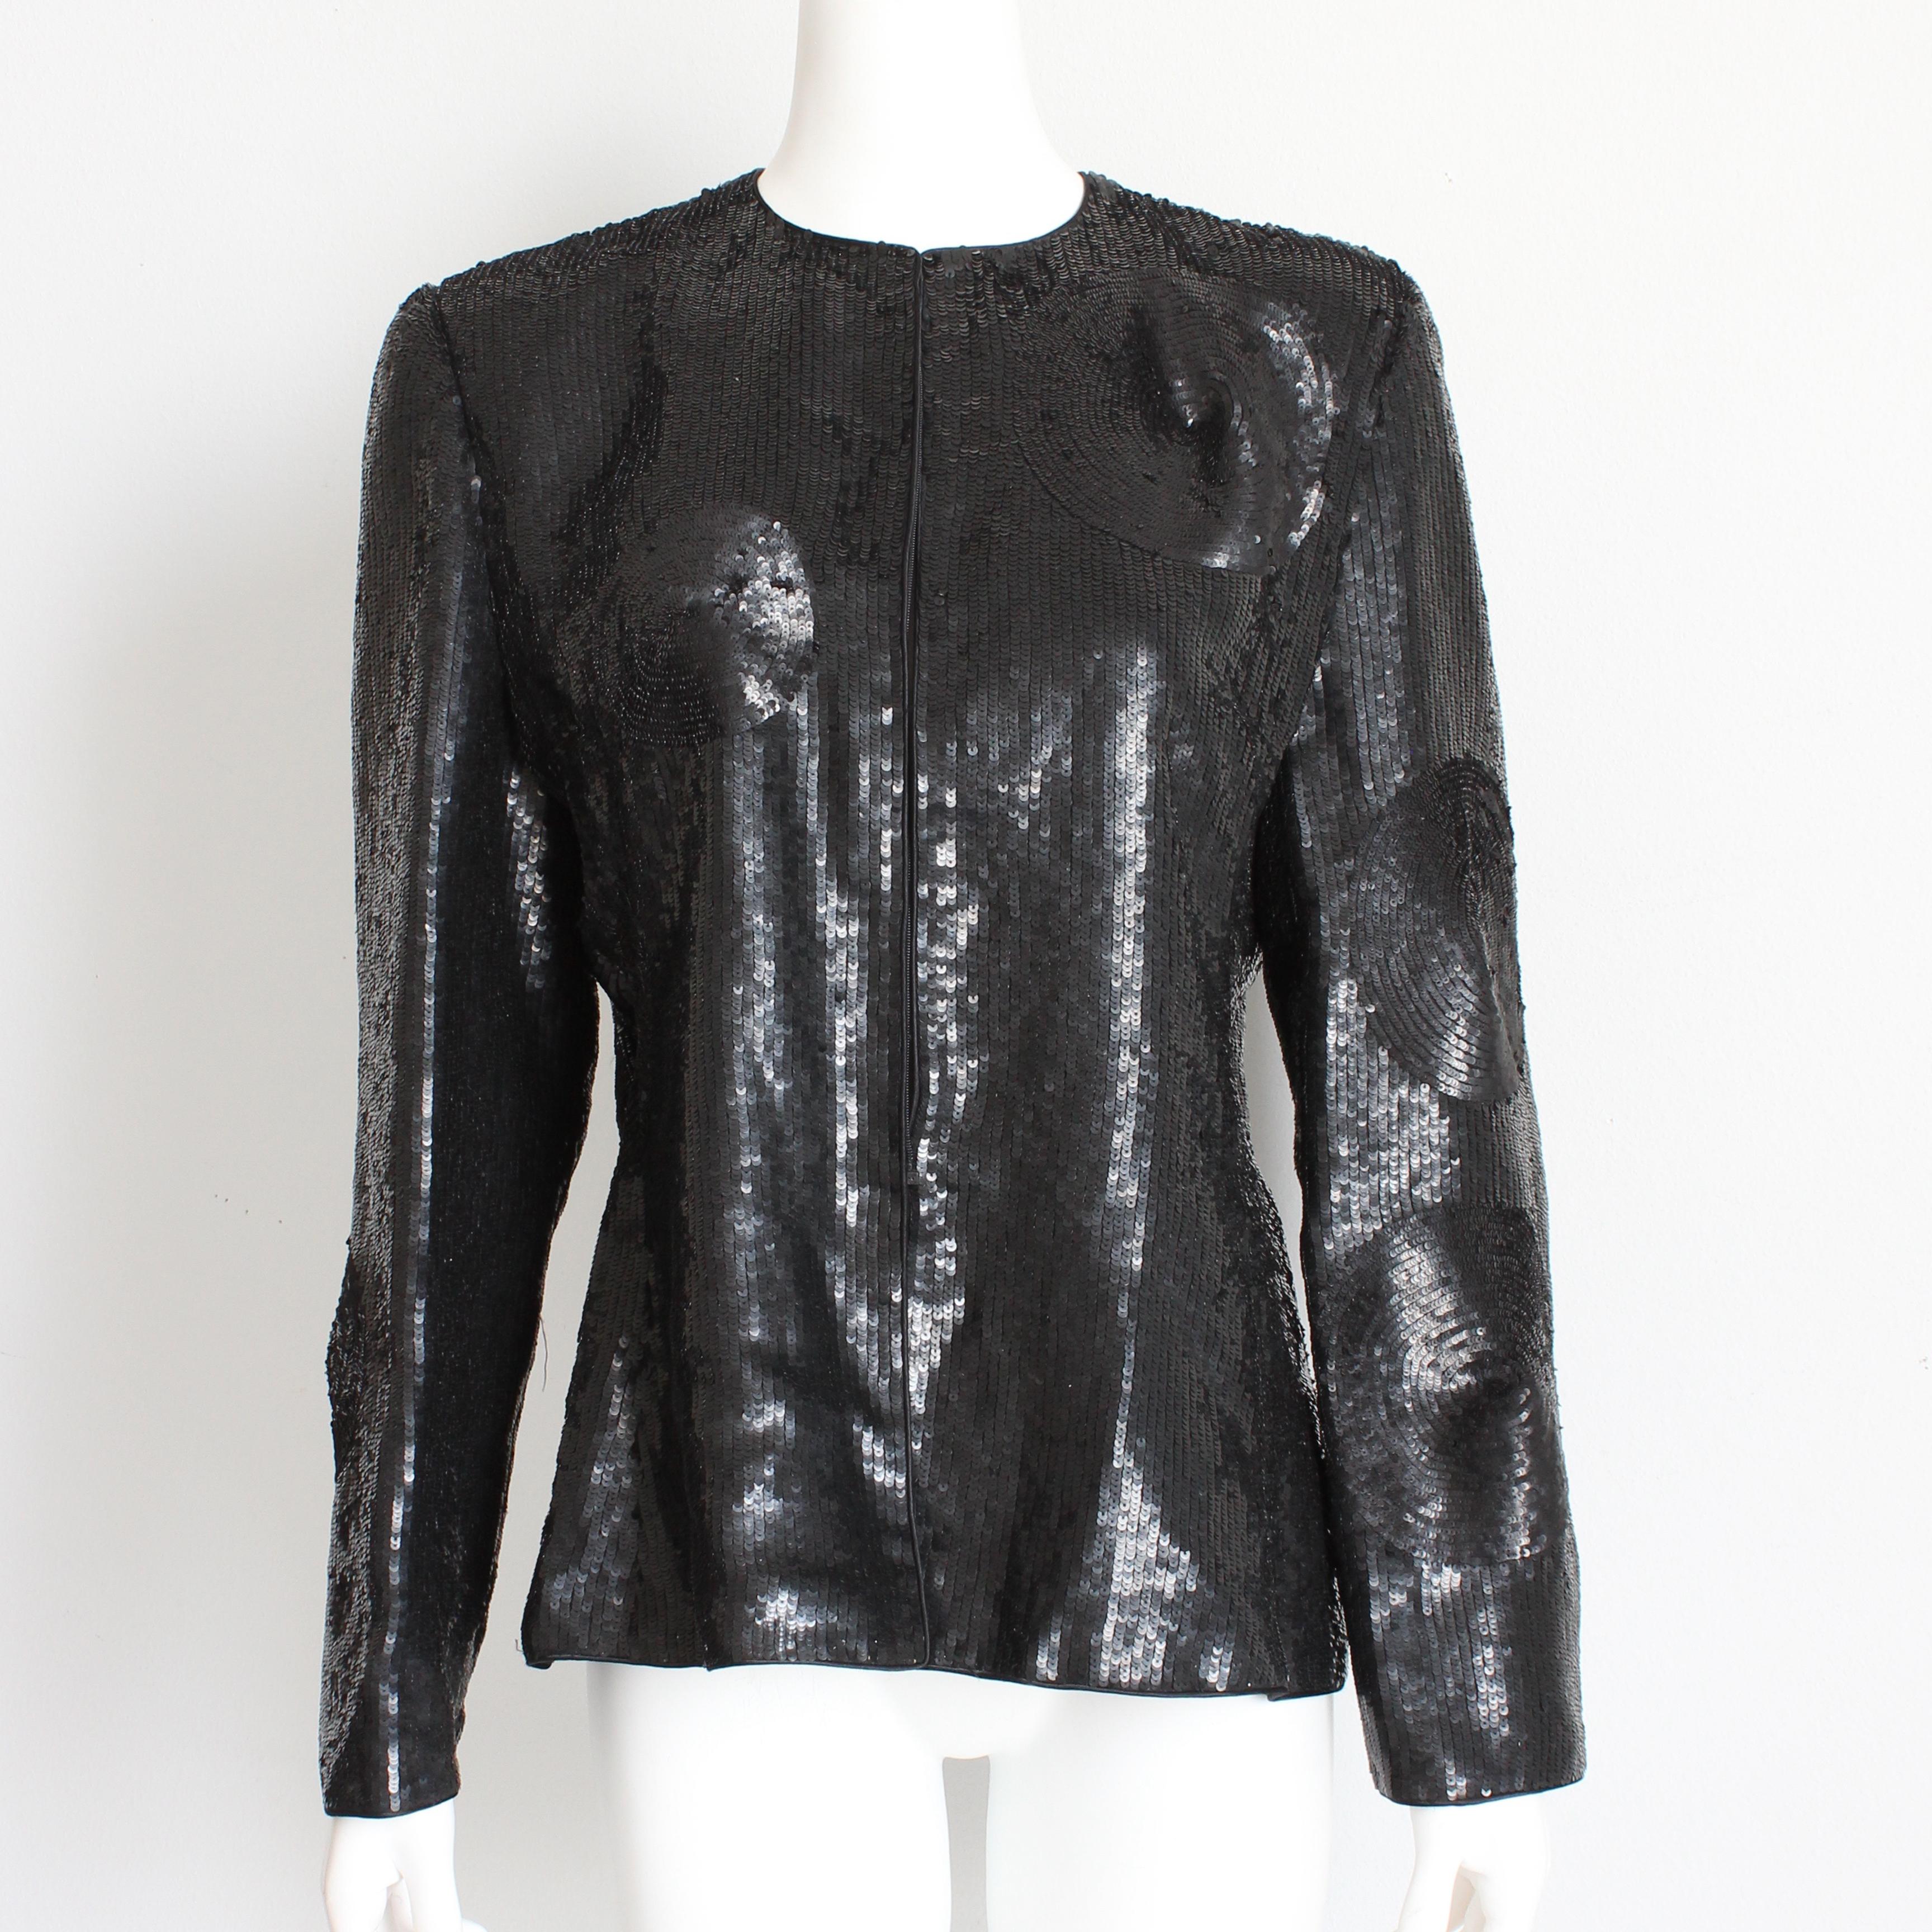 Authentic, preowned, vintage jacket, made by Mary McFadden Couture, most likely in the 90s.  Originally sold by high end boutique Nina Rayner of Delray Beach. Made from black sequins with an abstract circular pattern, it looks amazingly chic and